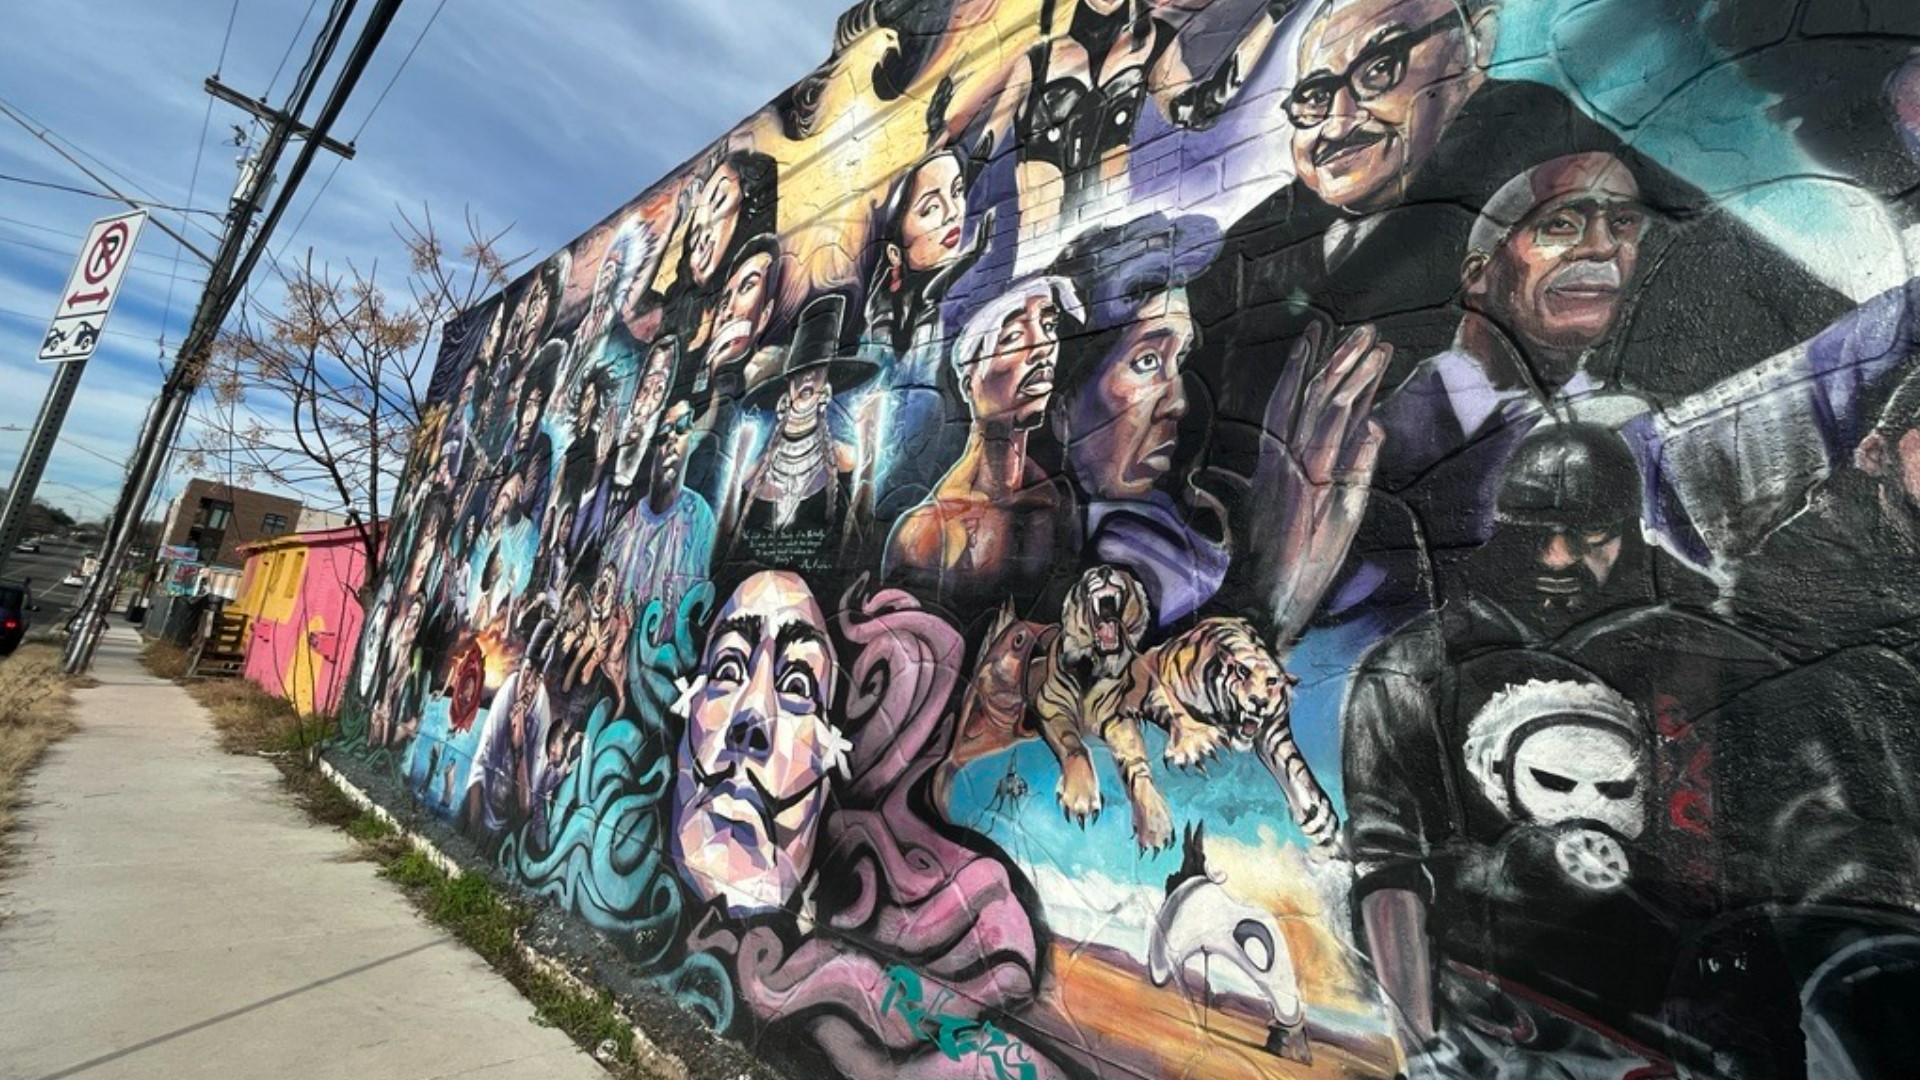 For Black History Month, we look at the work of Austin muralist Chris Rogers, who is highlighting others through art. KVUE spoke with Rogers about his art.